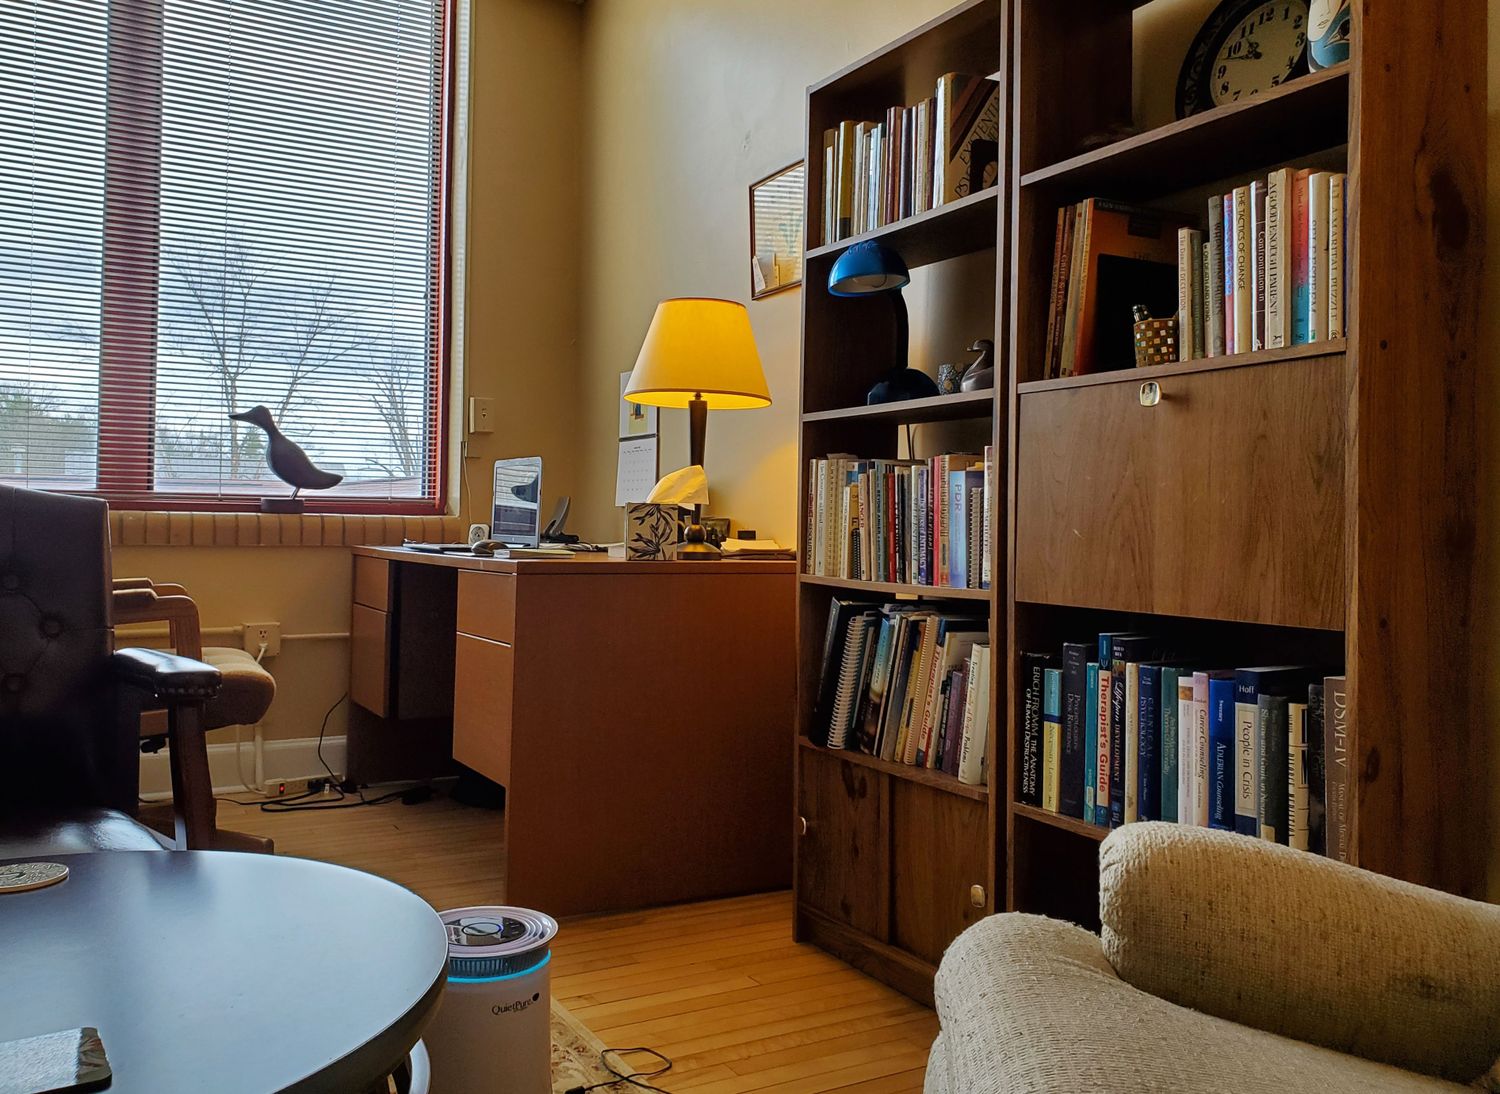 Gallery Photo of view of Ken's counseling office